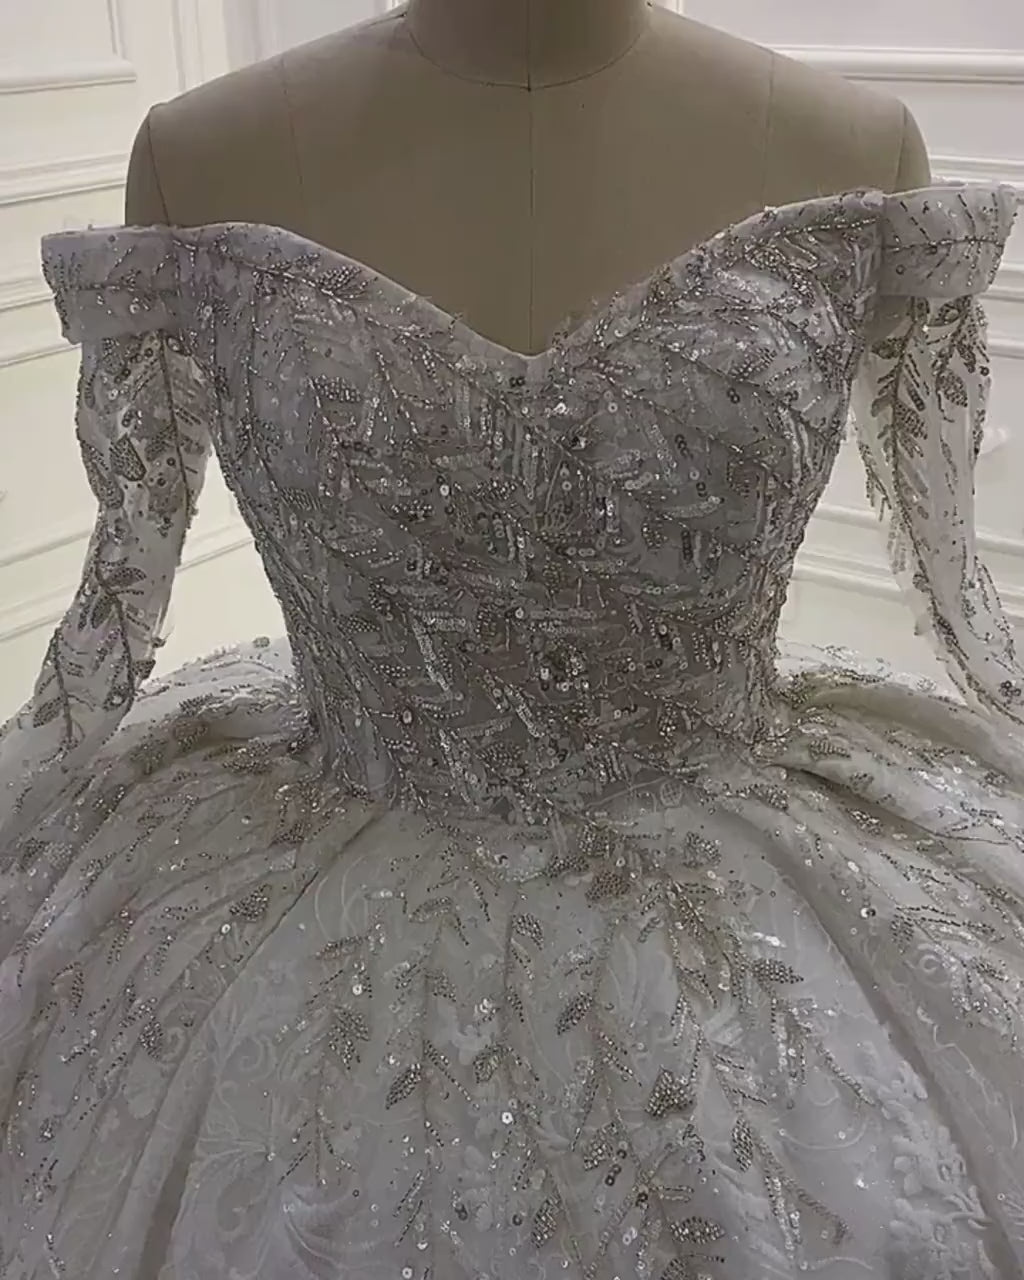 Luxury bridal princess style dress/ Extravagant bridal gown/Gorgeous hand beaded and embellished wedding dress/ Ball Gown/Prom dress